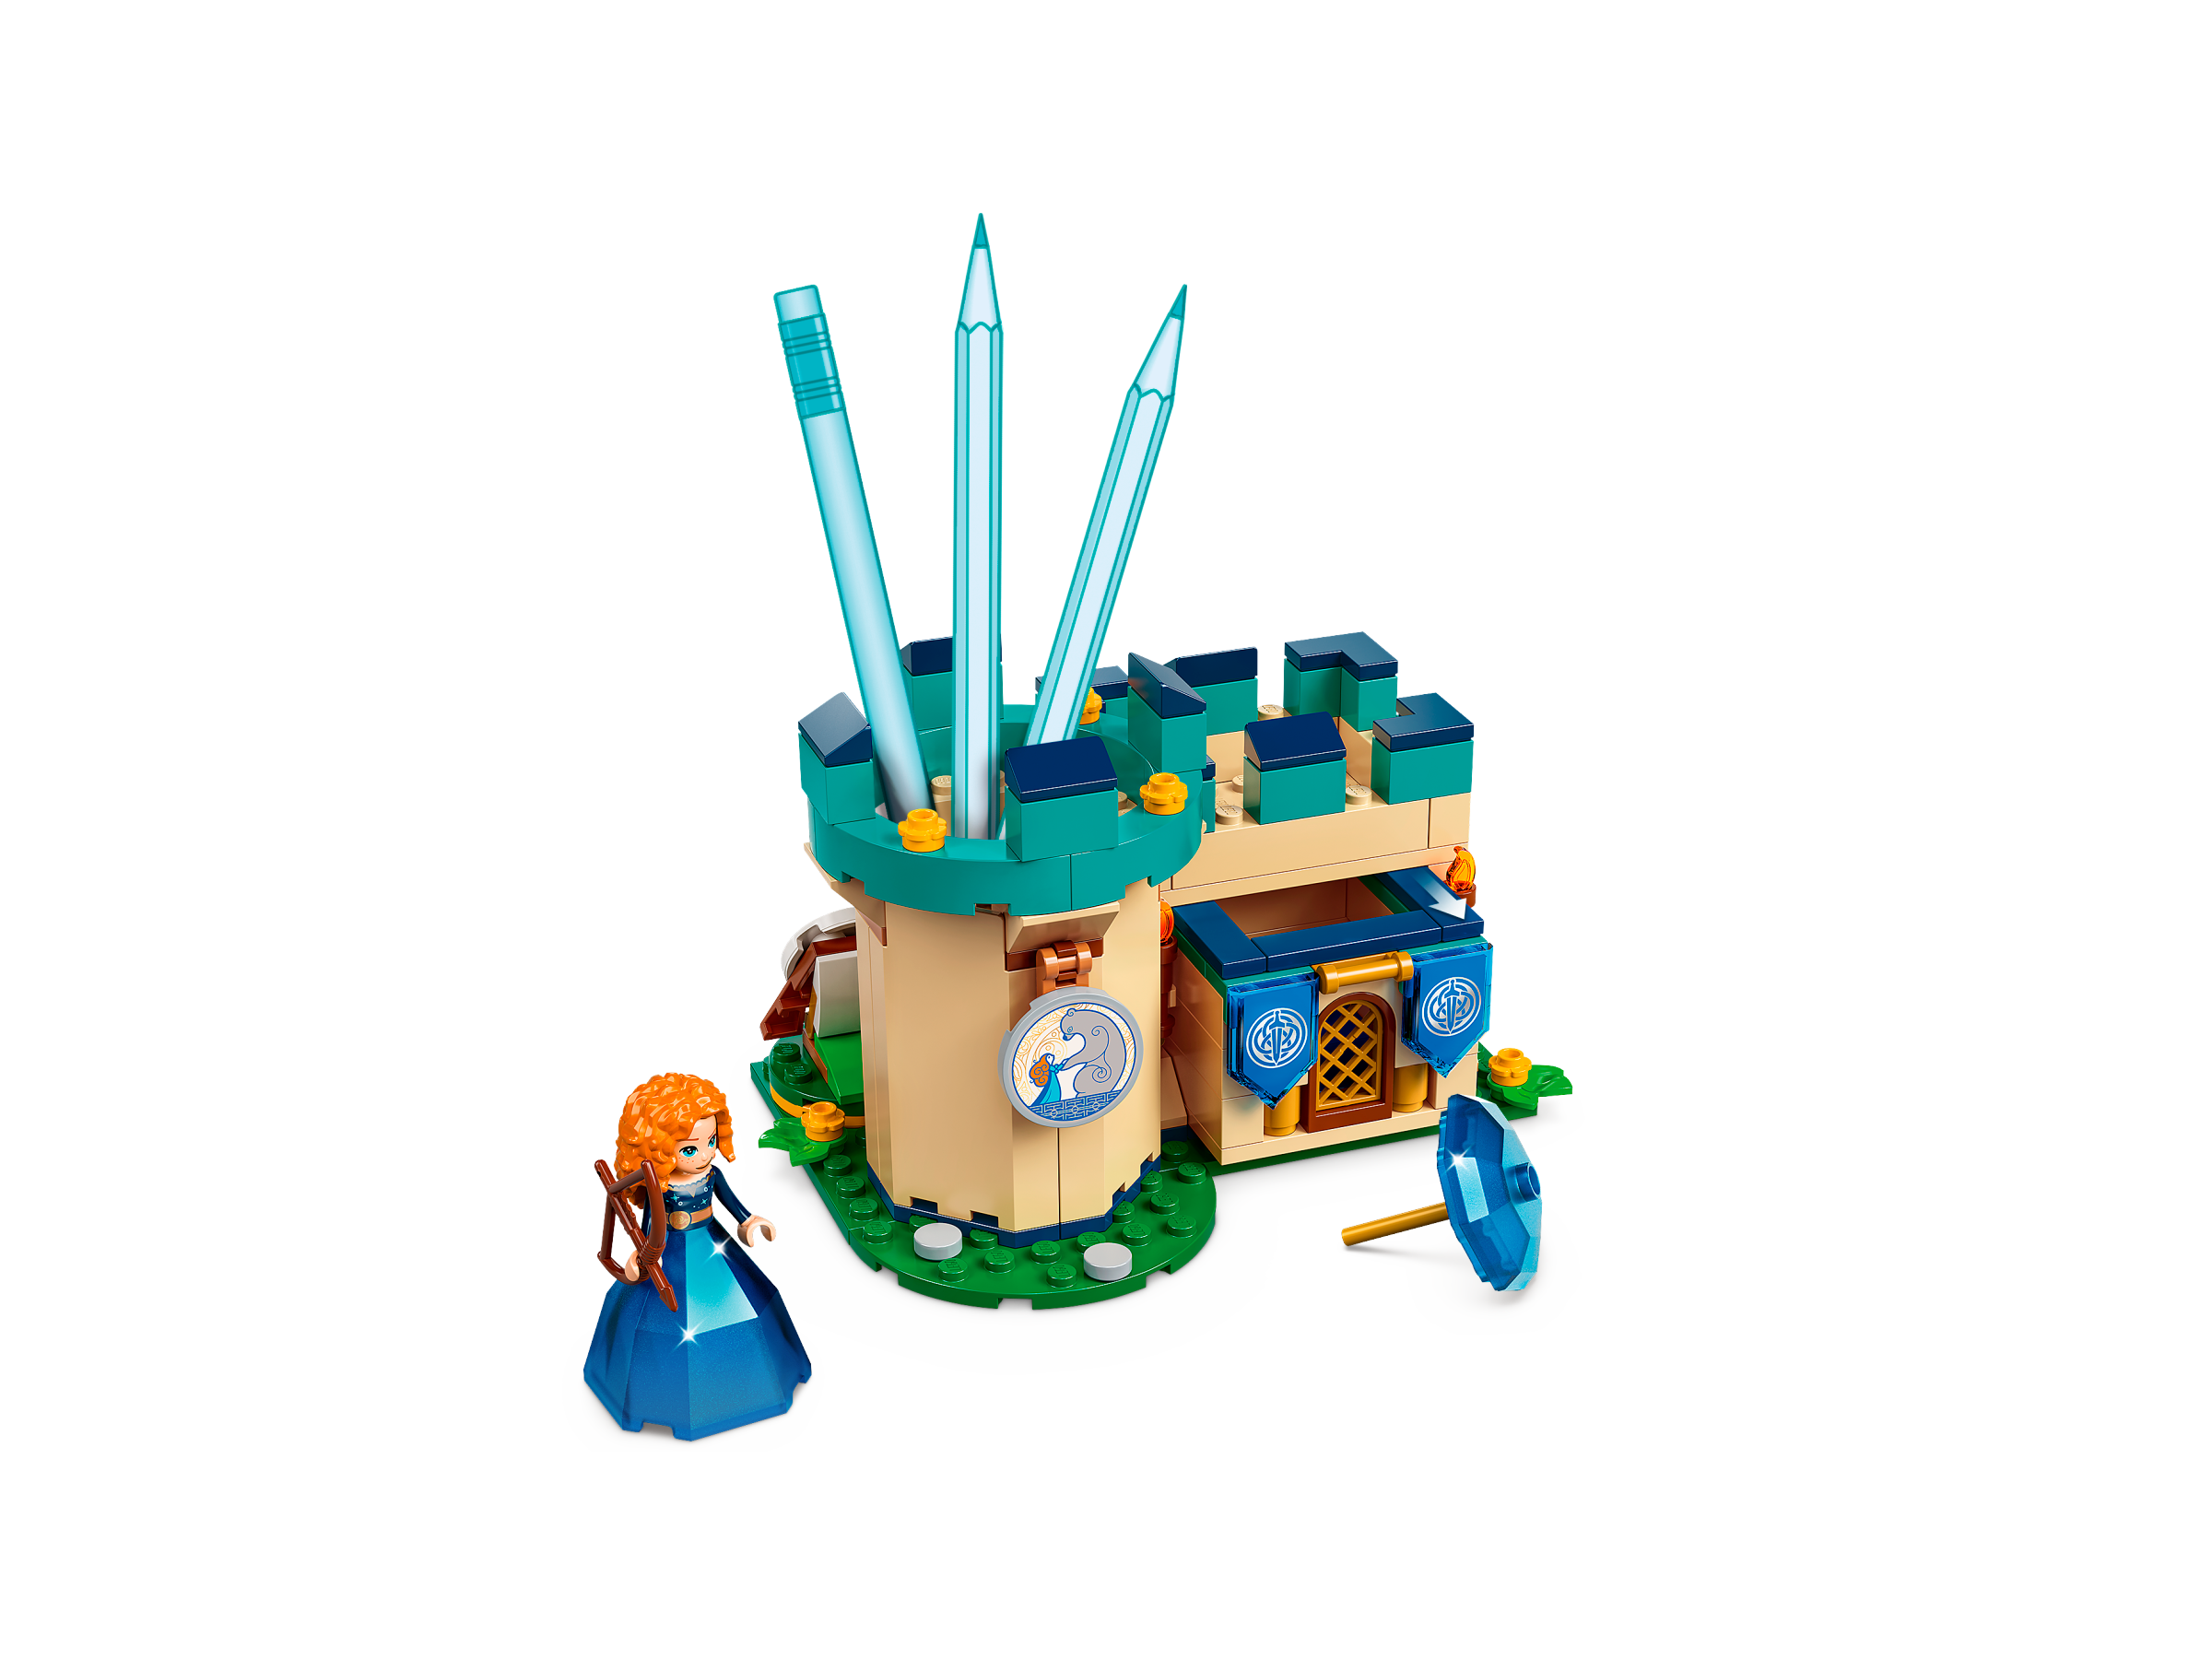 Aurora, Merida and Tiana’s Enchanted Creations 43203 | Disney™ | Buy online  at the Official LEGO® Shop US